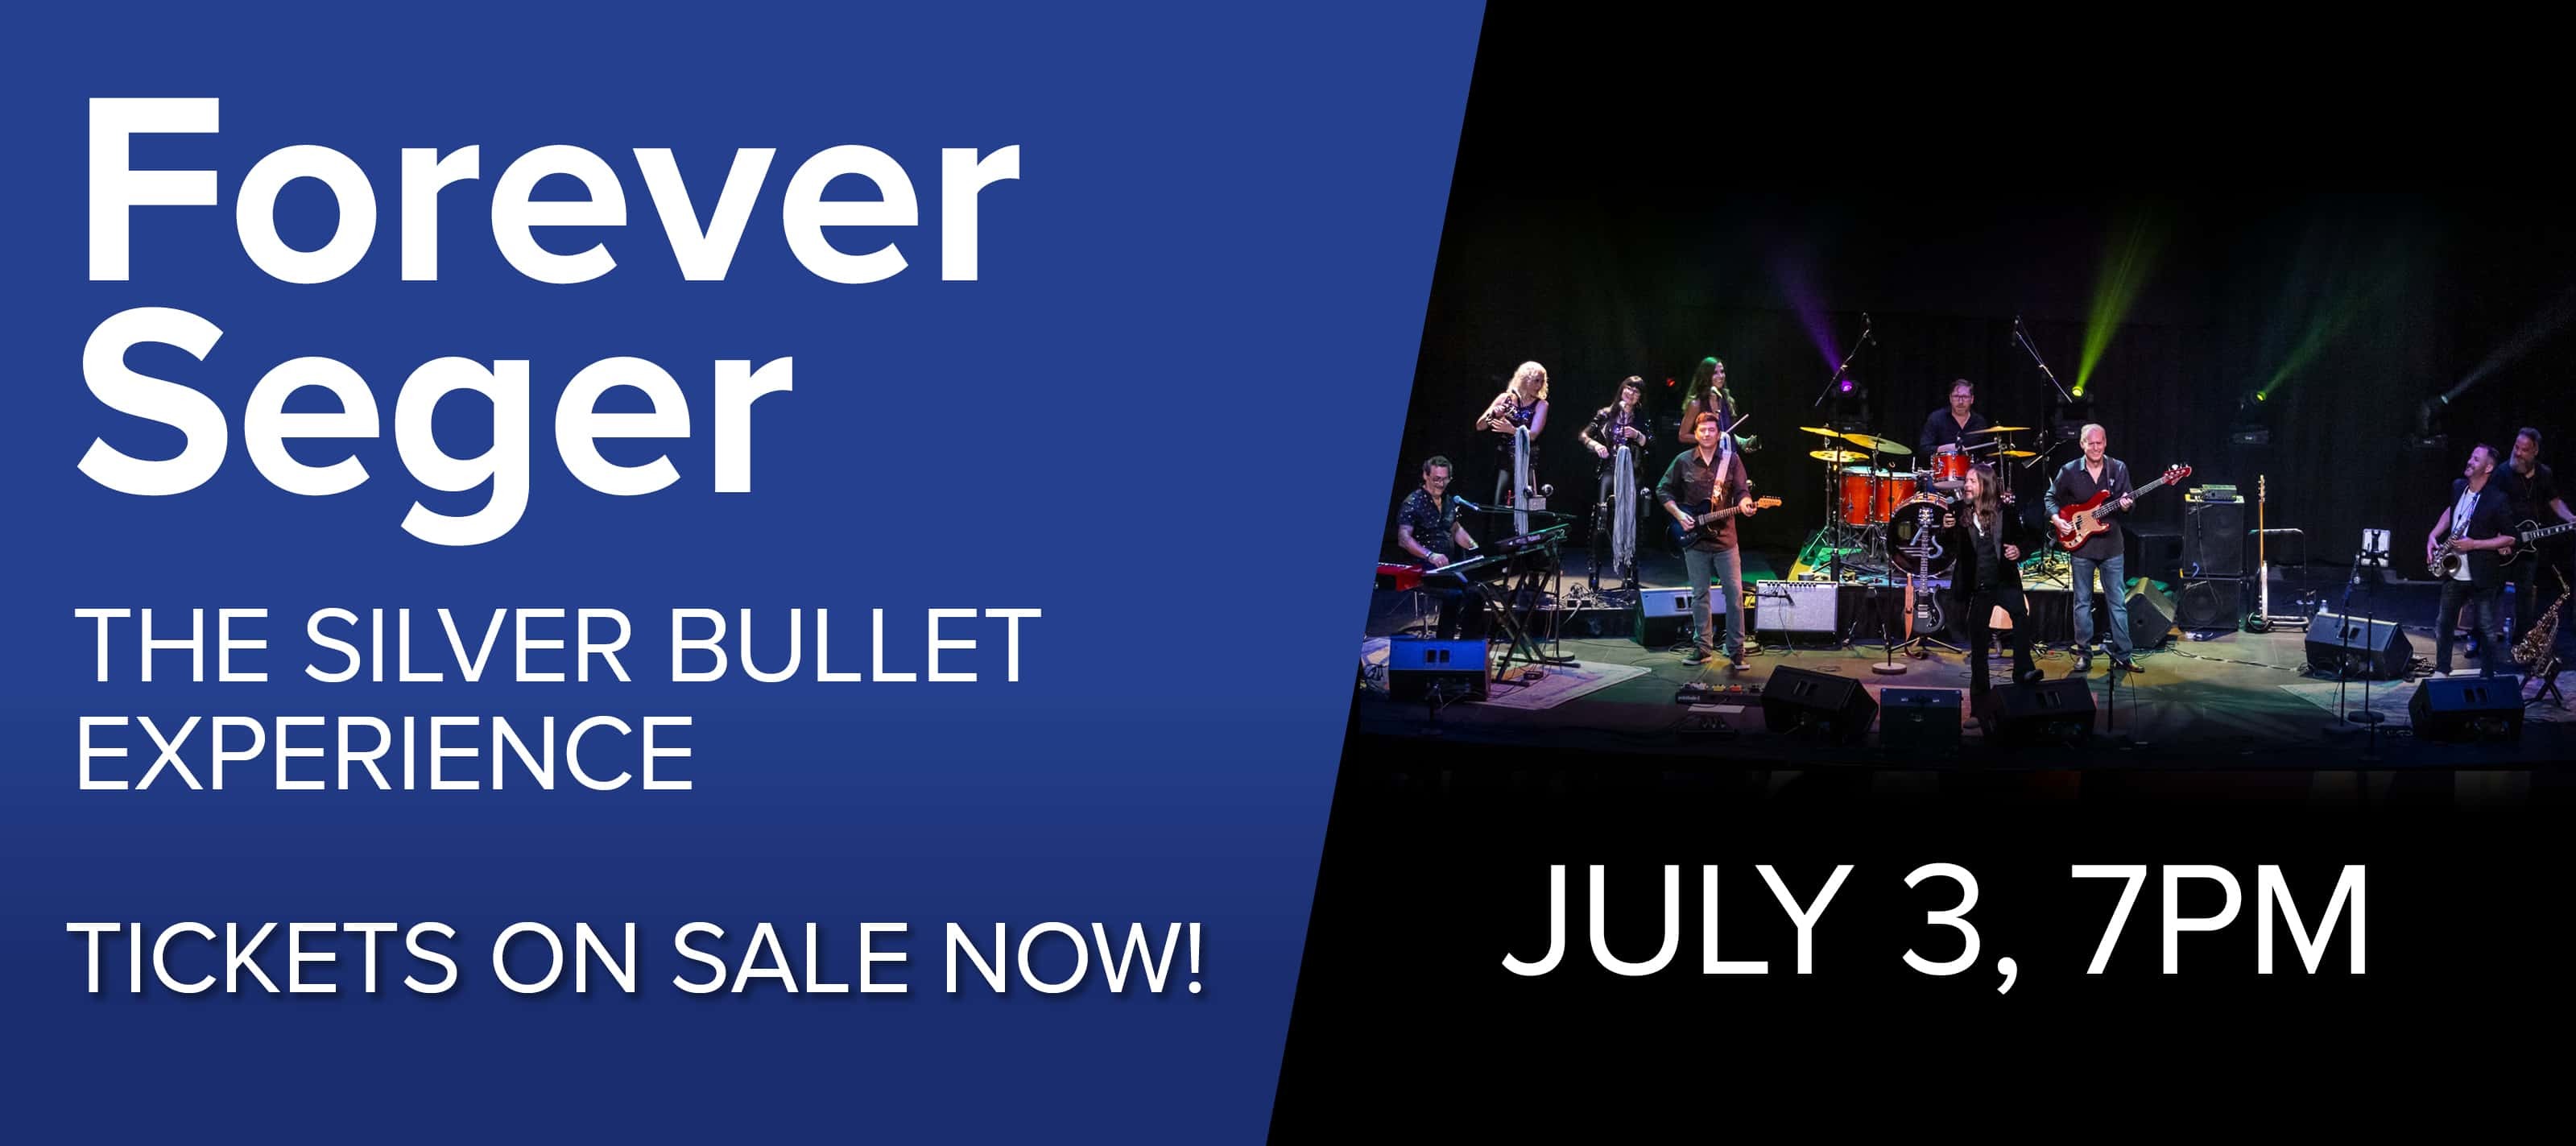 Wide shot of the band Forever Seger performing live in concert.  Text: Forever Seger The Silver Bullet Experience Tickets On Sale Now. Concert on July 3 at 7pm'